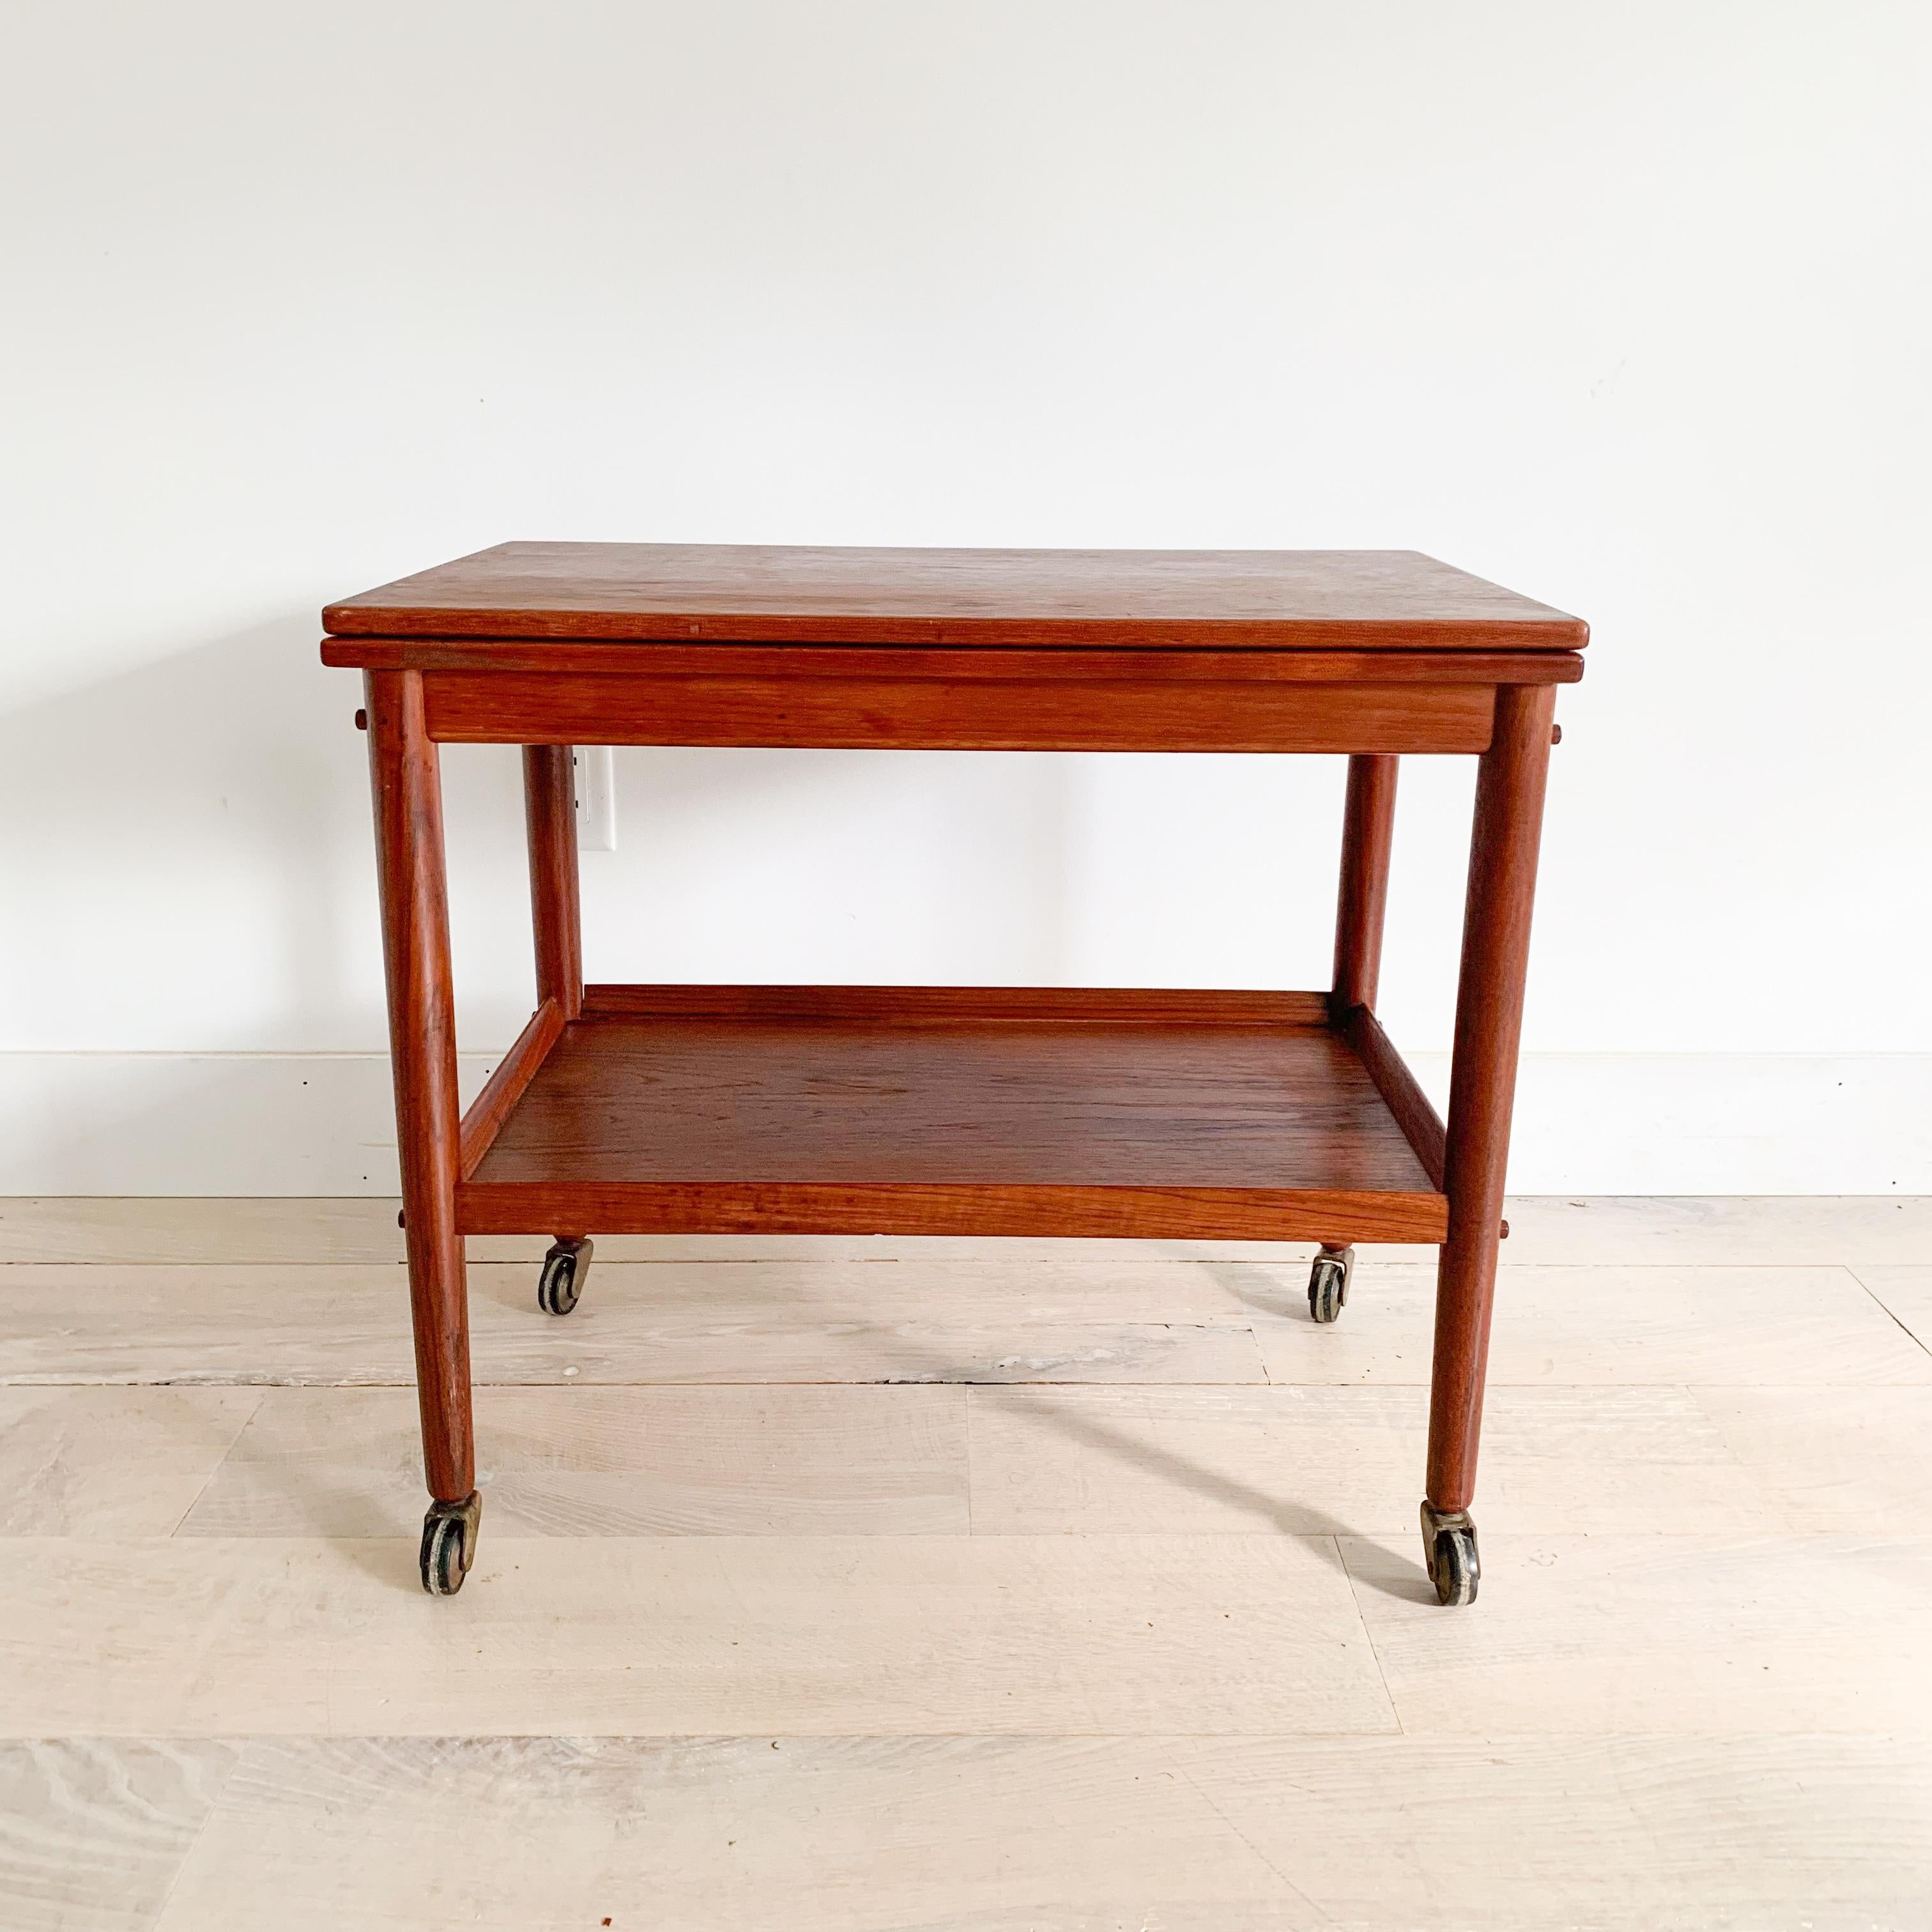 Hard to find mid century modern danish teak bar cart by Grete Jalk for PJ with swivel expandable top! Some light scuffing/scratching from age appropriate wear.

27.25